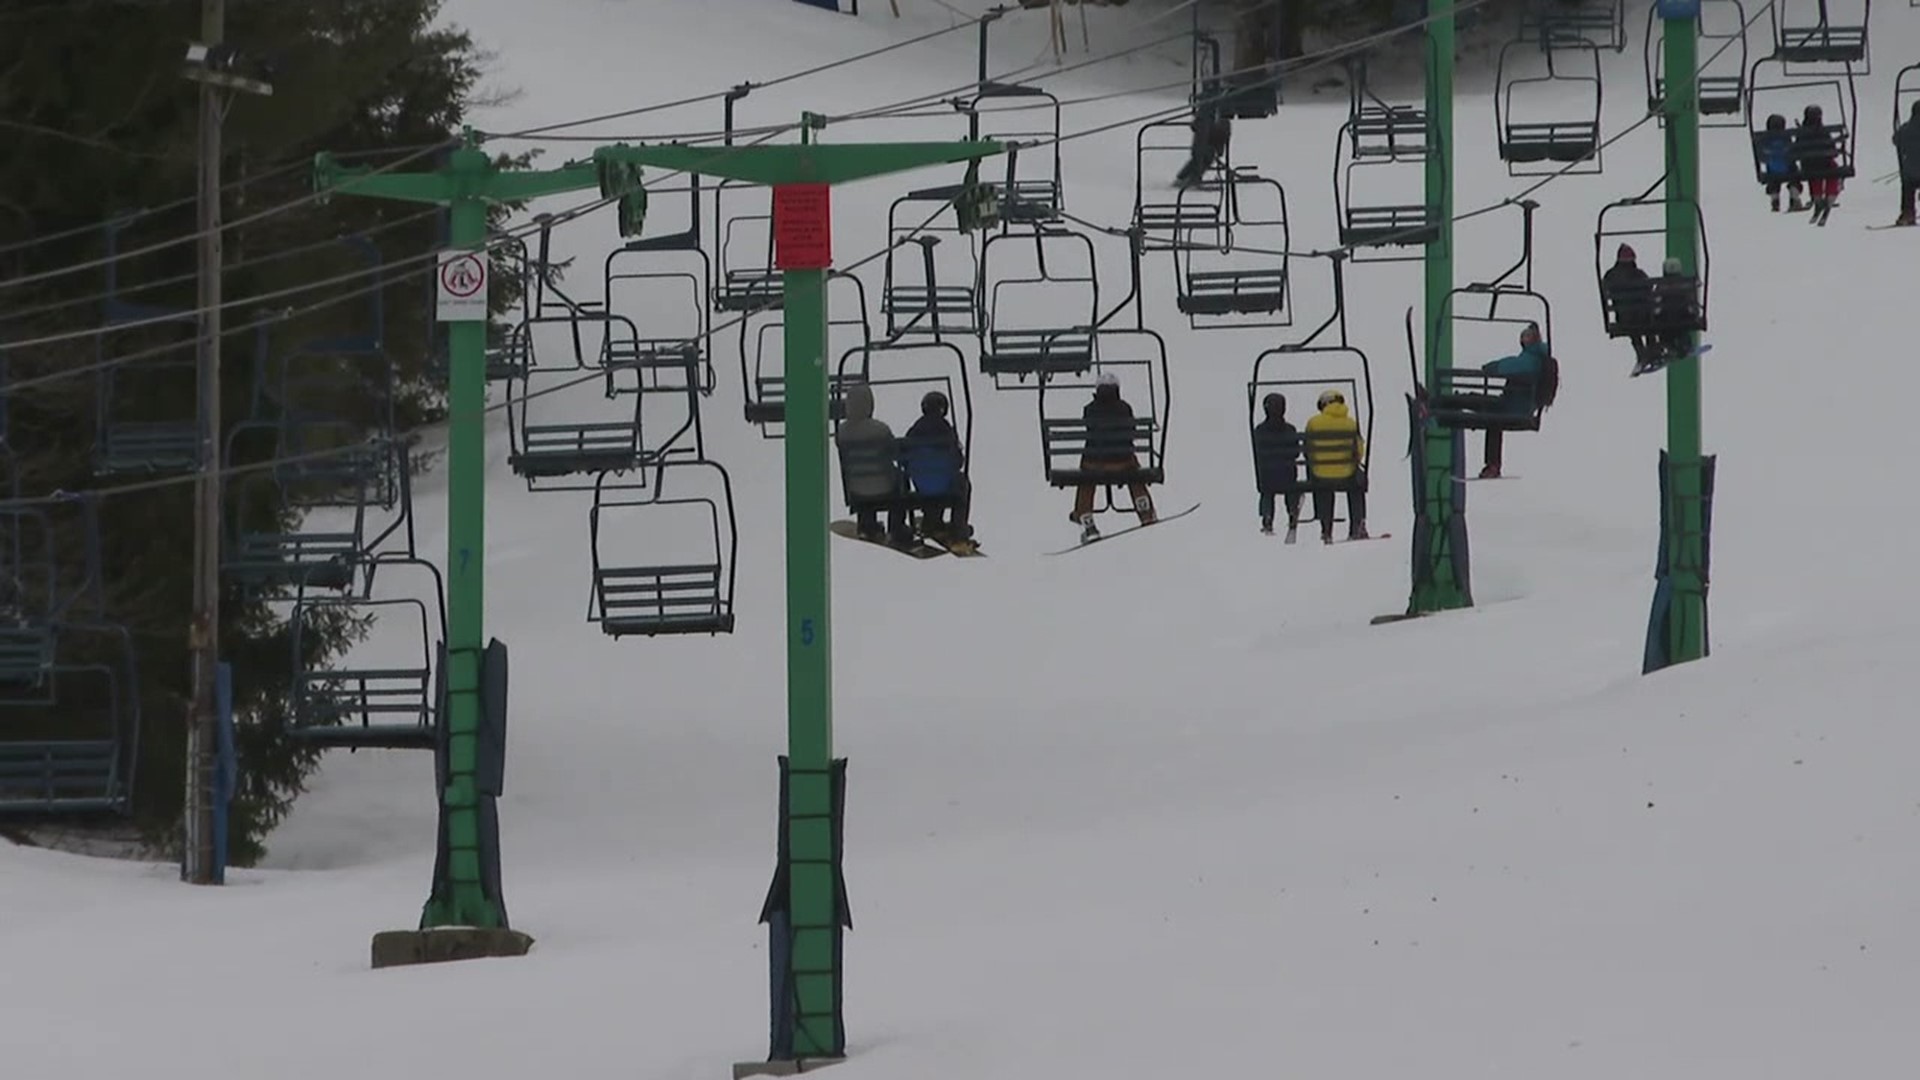 The ski resort is fully open thanks to the later winter storm that dropped several inches of snow last week.